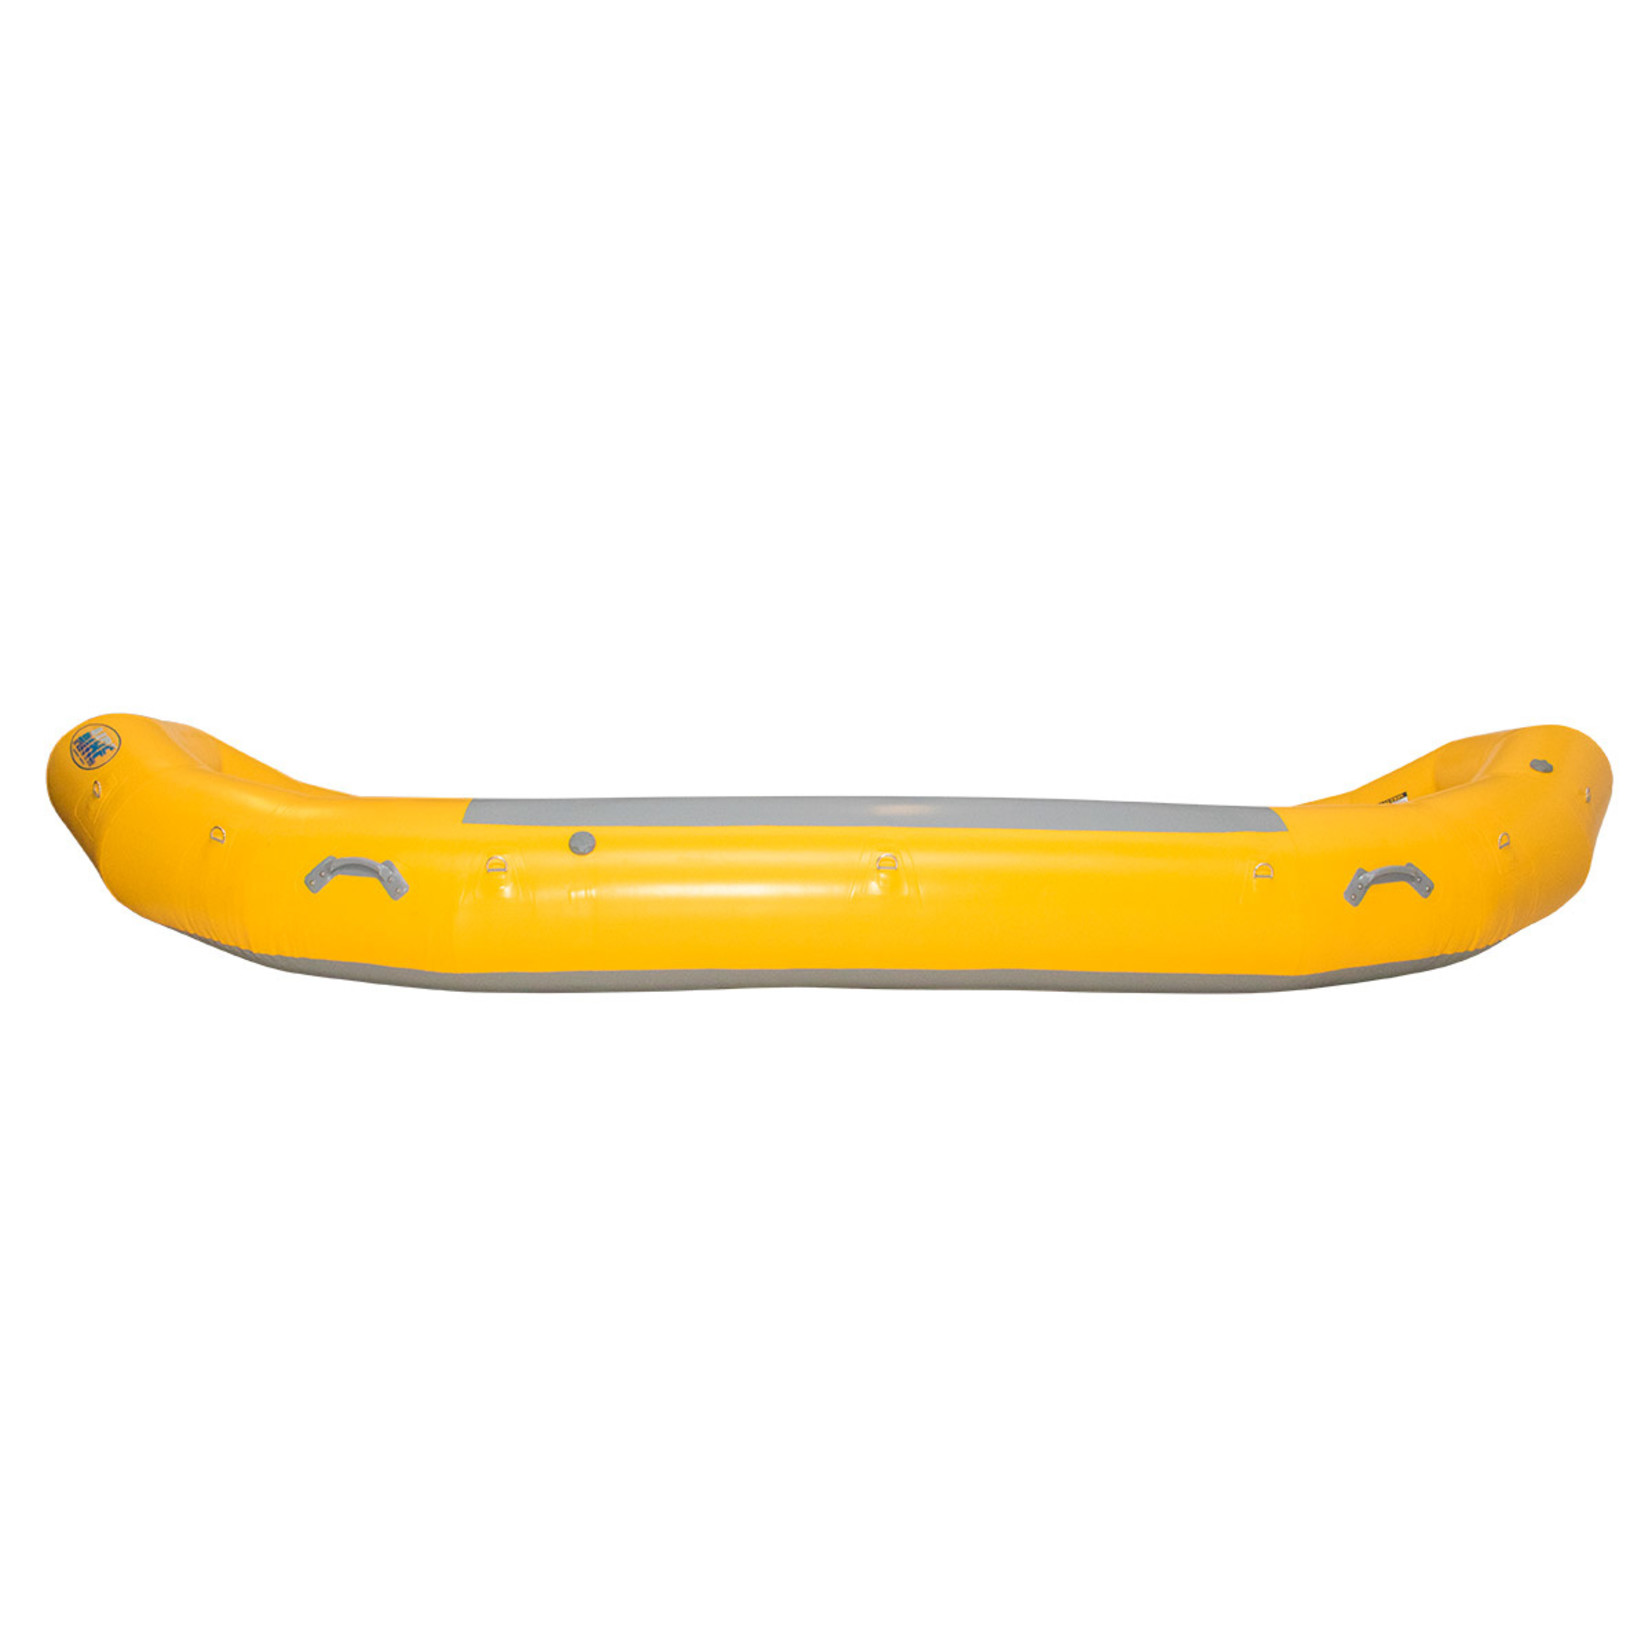 AIRE AIRE 160DD Self-Bailing Raft